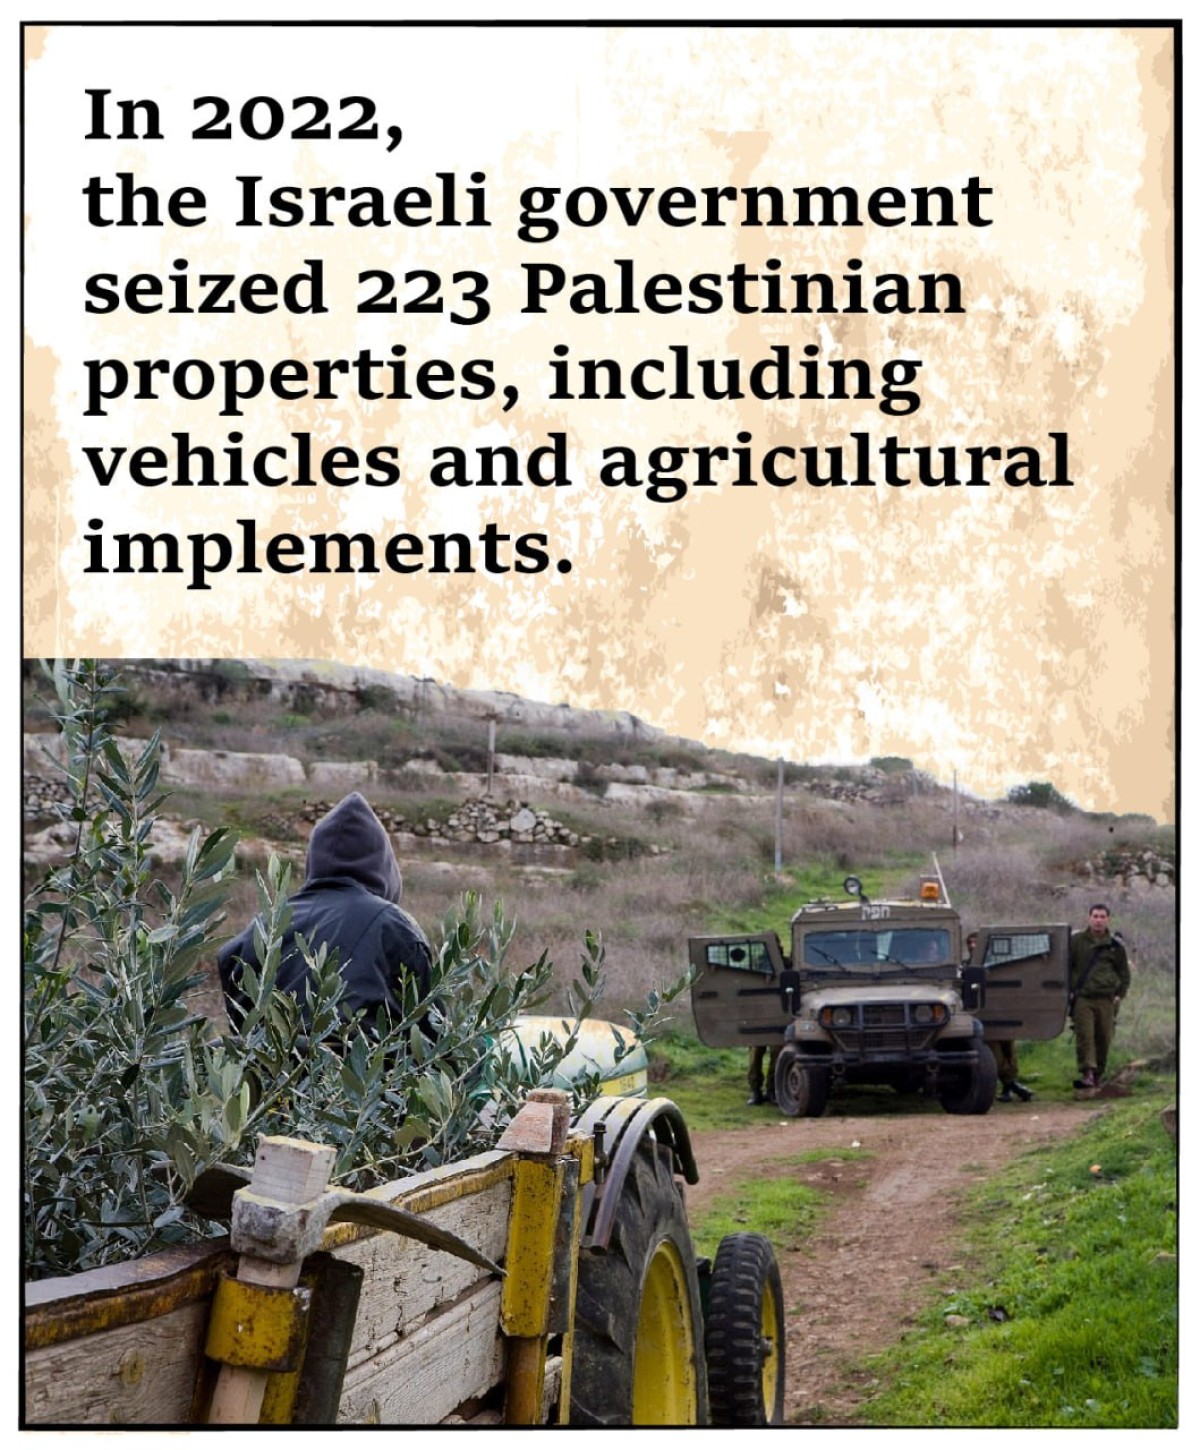 In 2022, the Israeli government seized 223 Palestinian properties, including vehicles and agricultural implements.